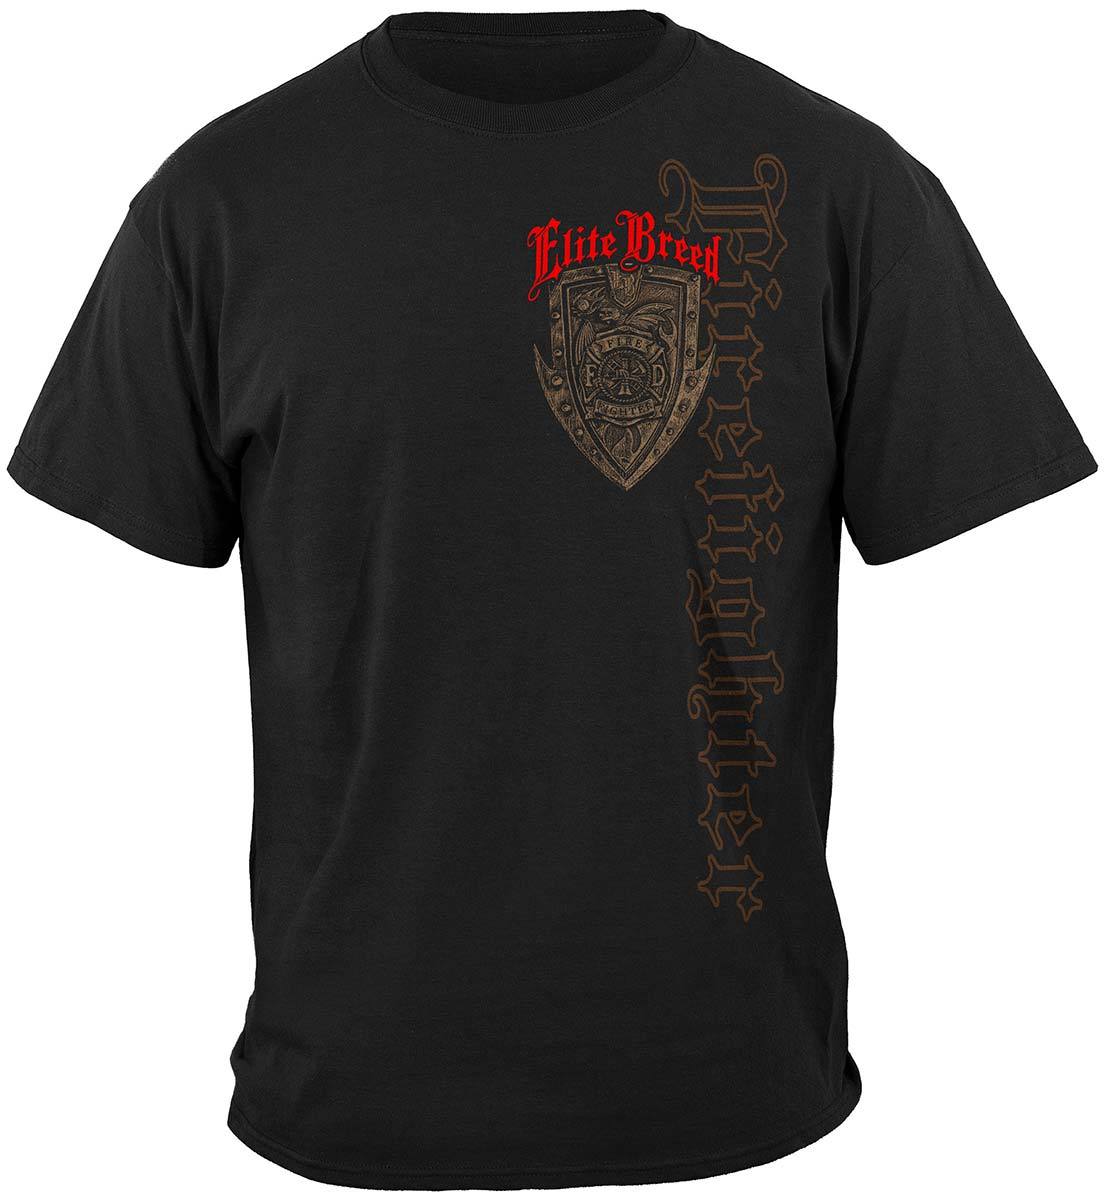 Elite Breed Firefighter Borne Or Your Not Premium T-Shirt